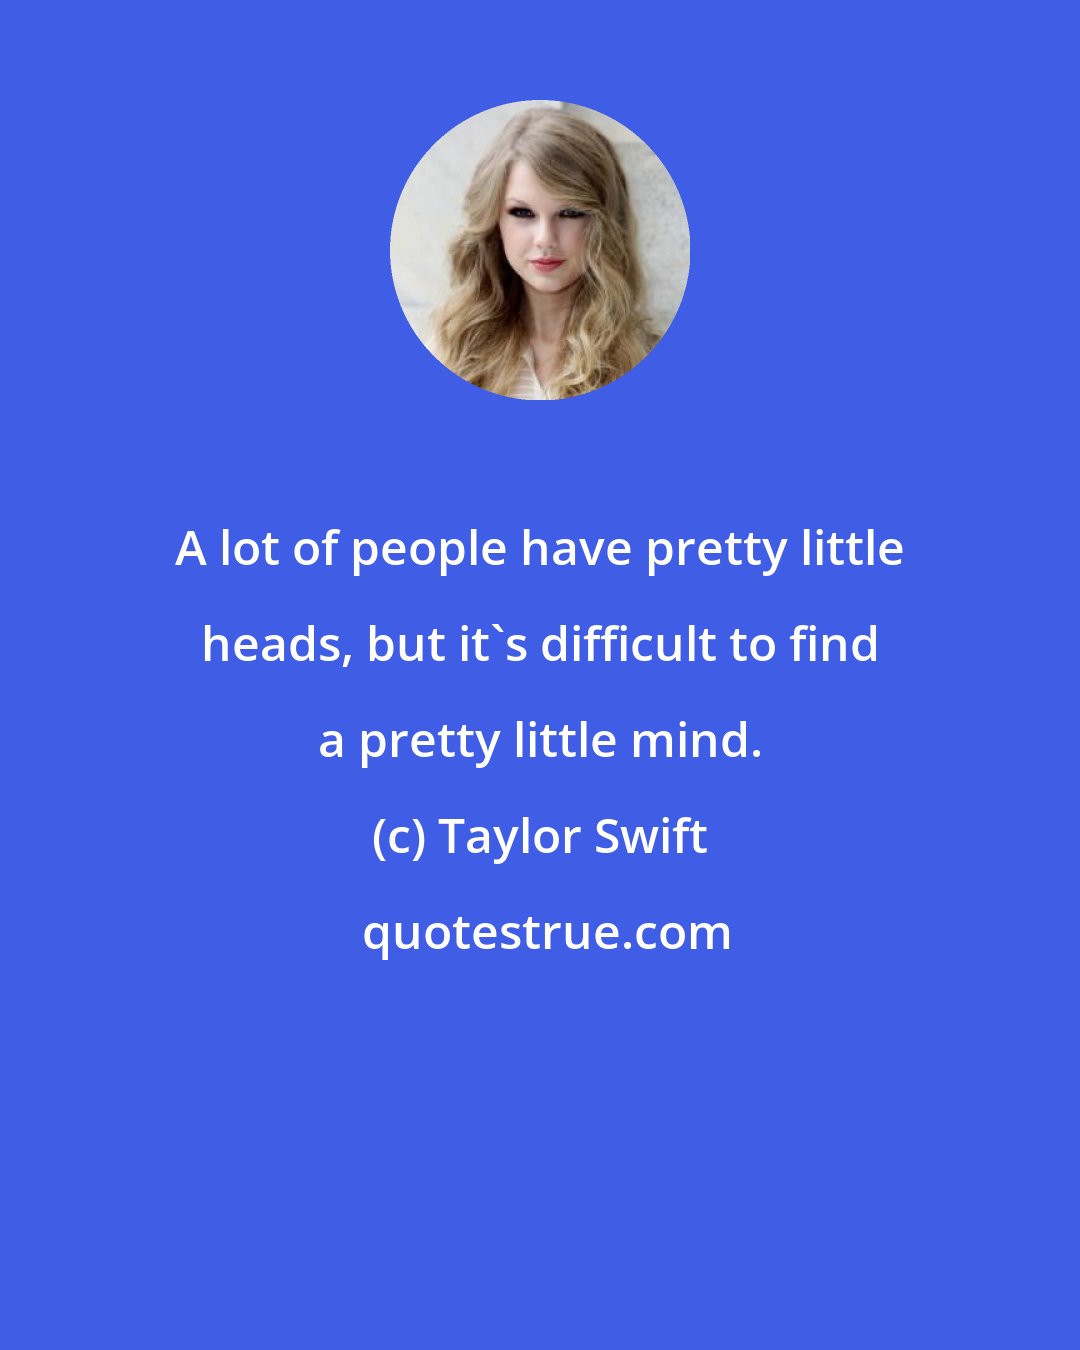 Taylor Swift: A lot of people have pretty little heads, but it's difficult to find a pretty little mind.